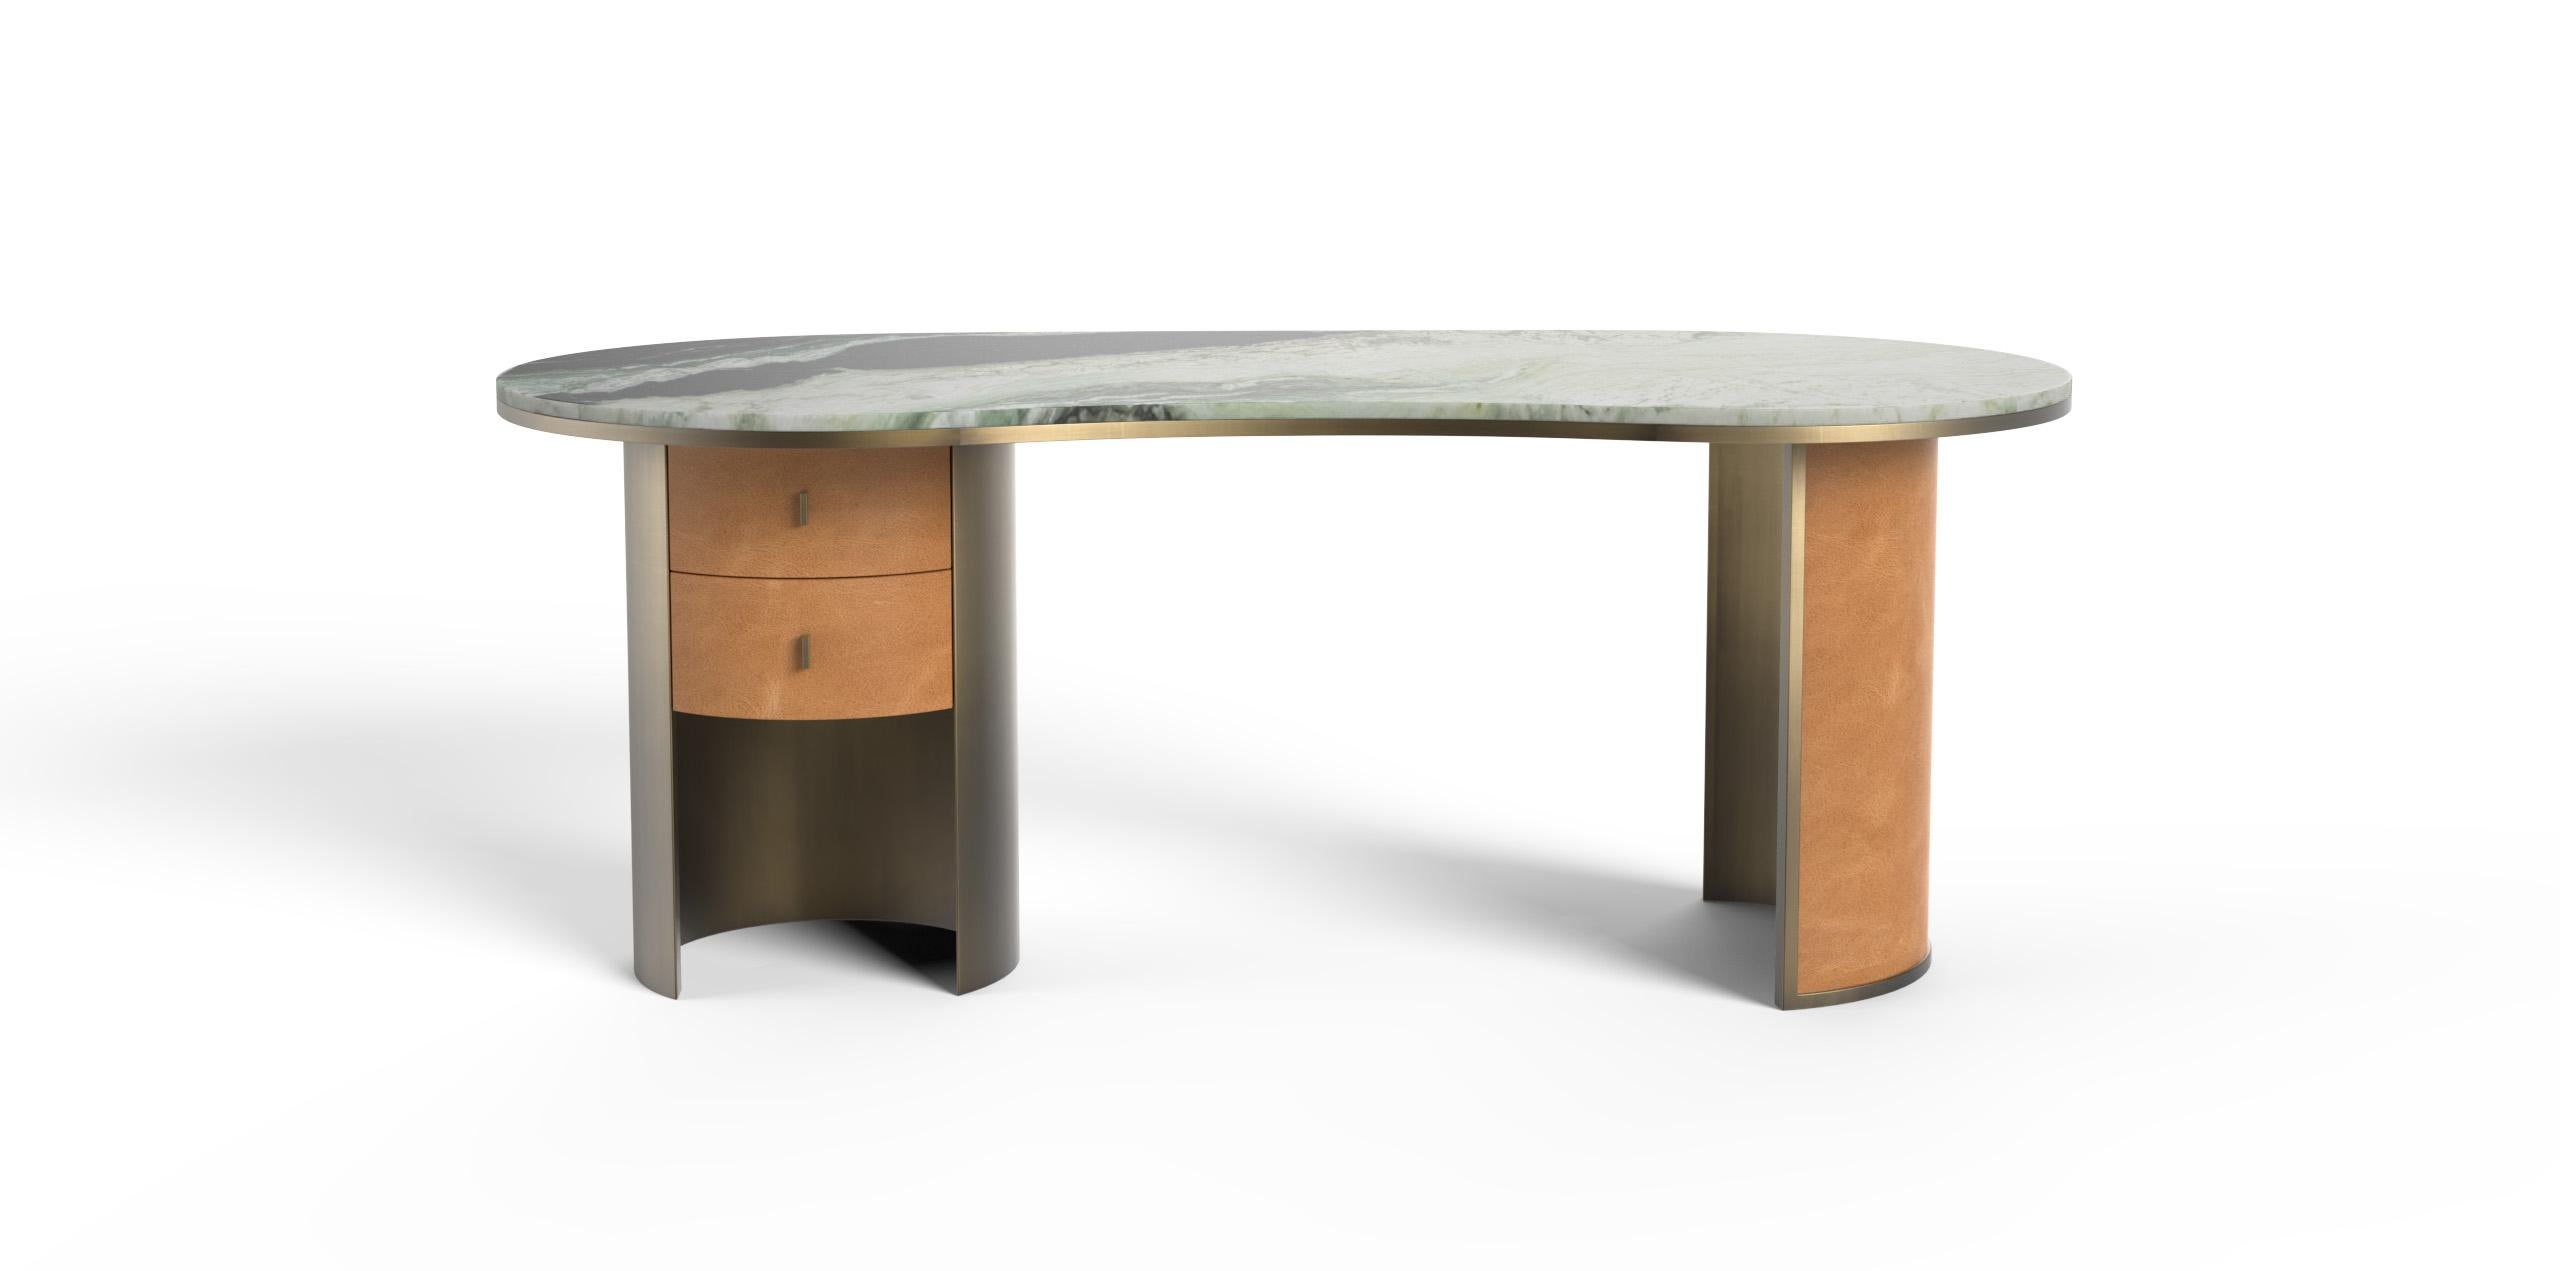 Castelo Desk, Contemporary Collection, Handcrafted in Portugal - Europe by Greenapple.

Designed by Rute Martins for the Contemporary Collection, the Castelo modern desk table pays homage to the castles that have played an important role in